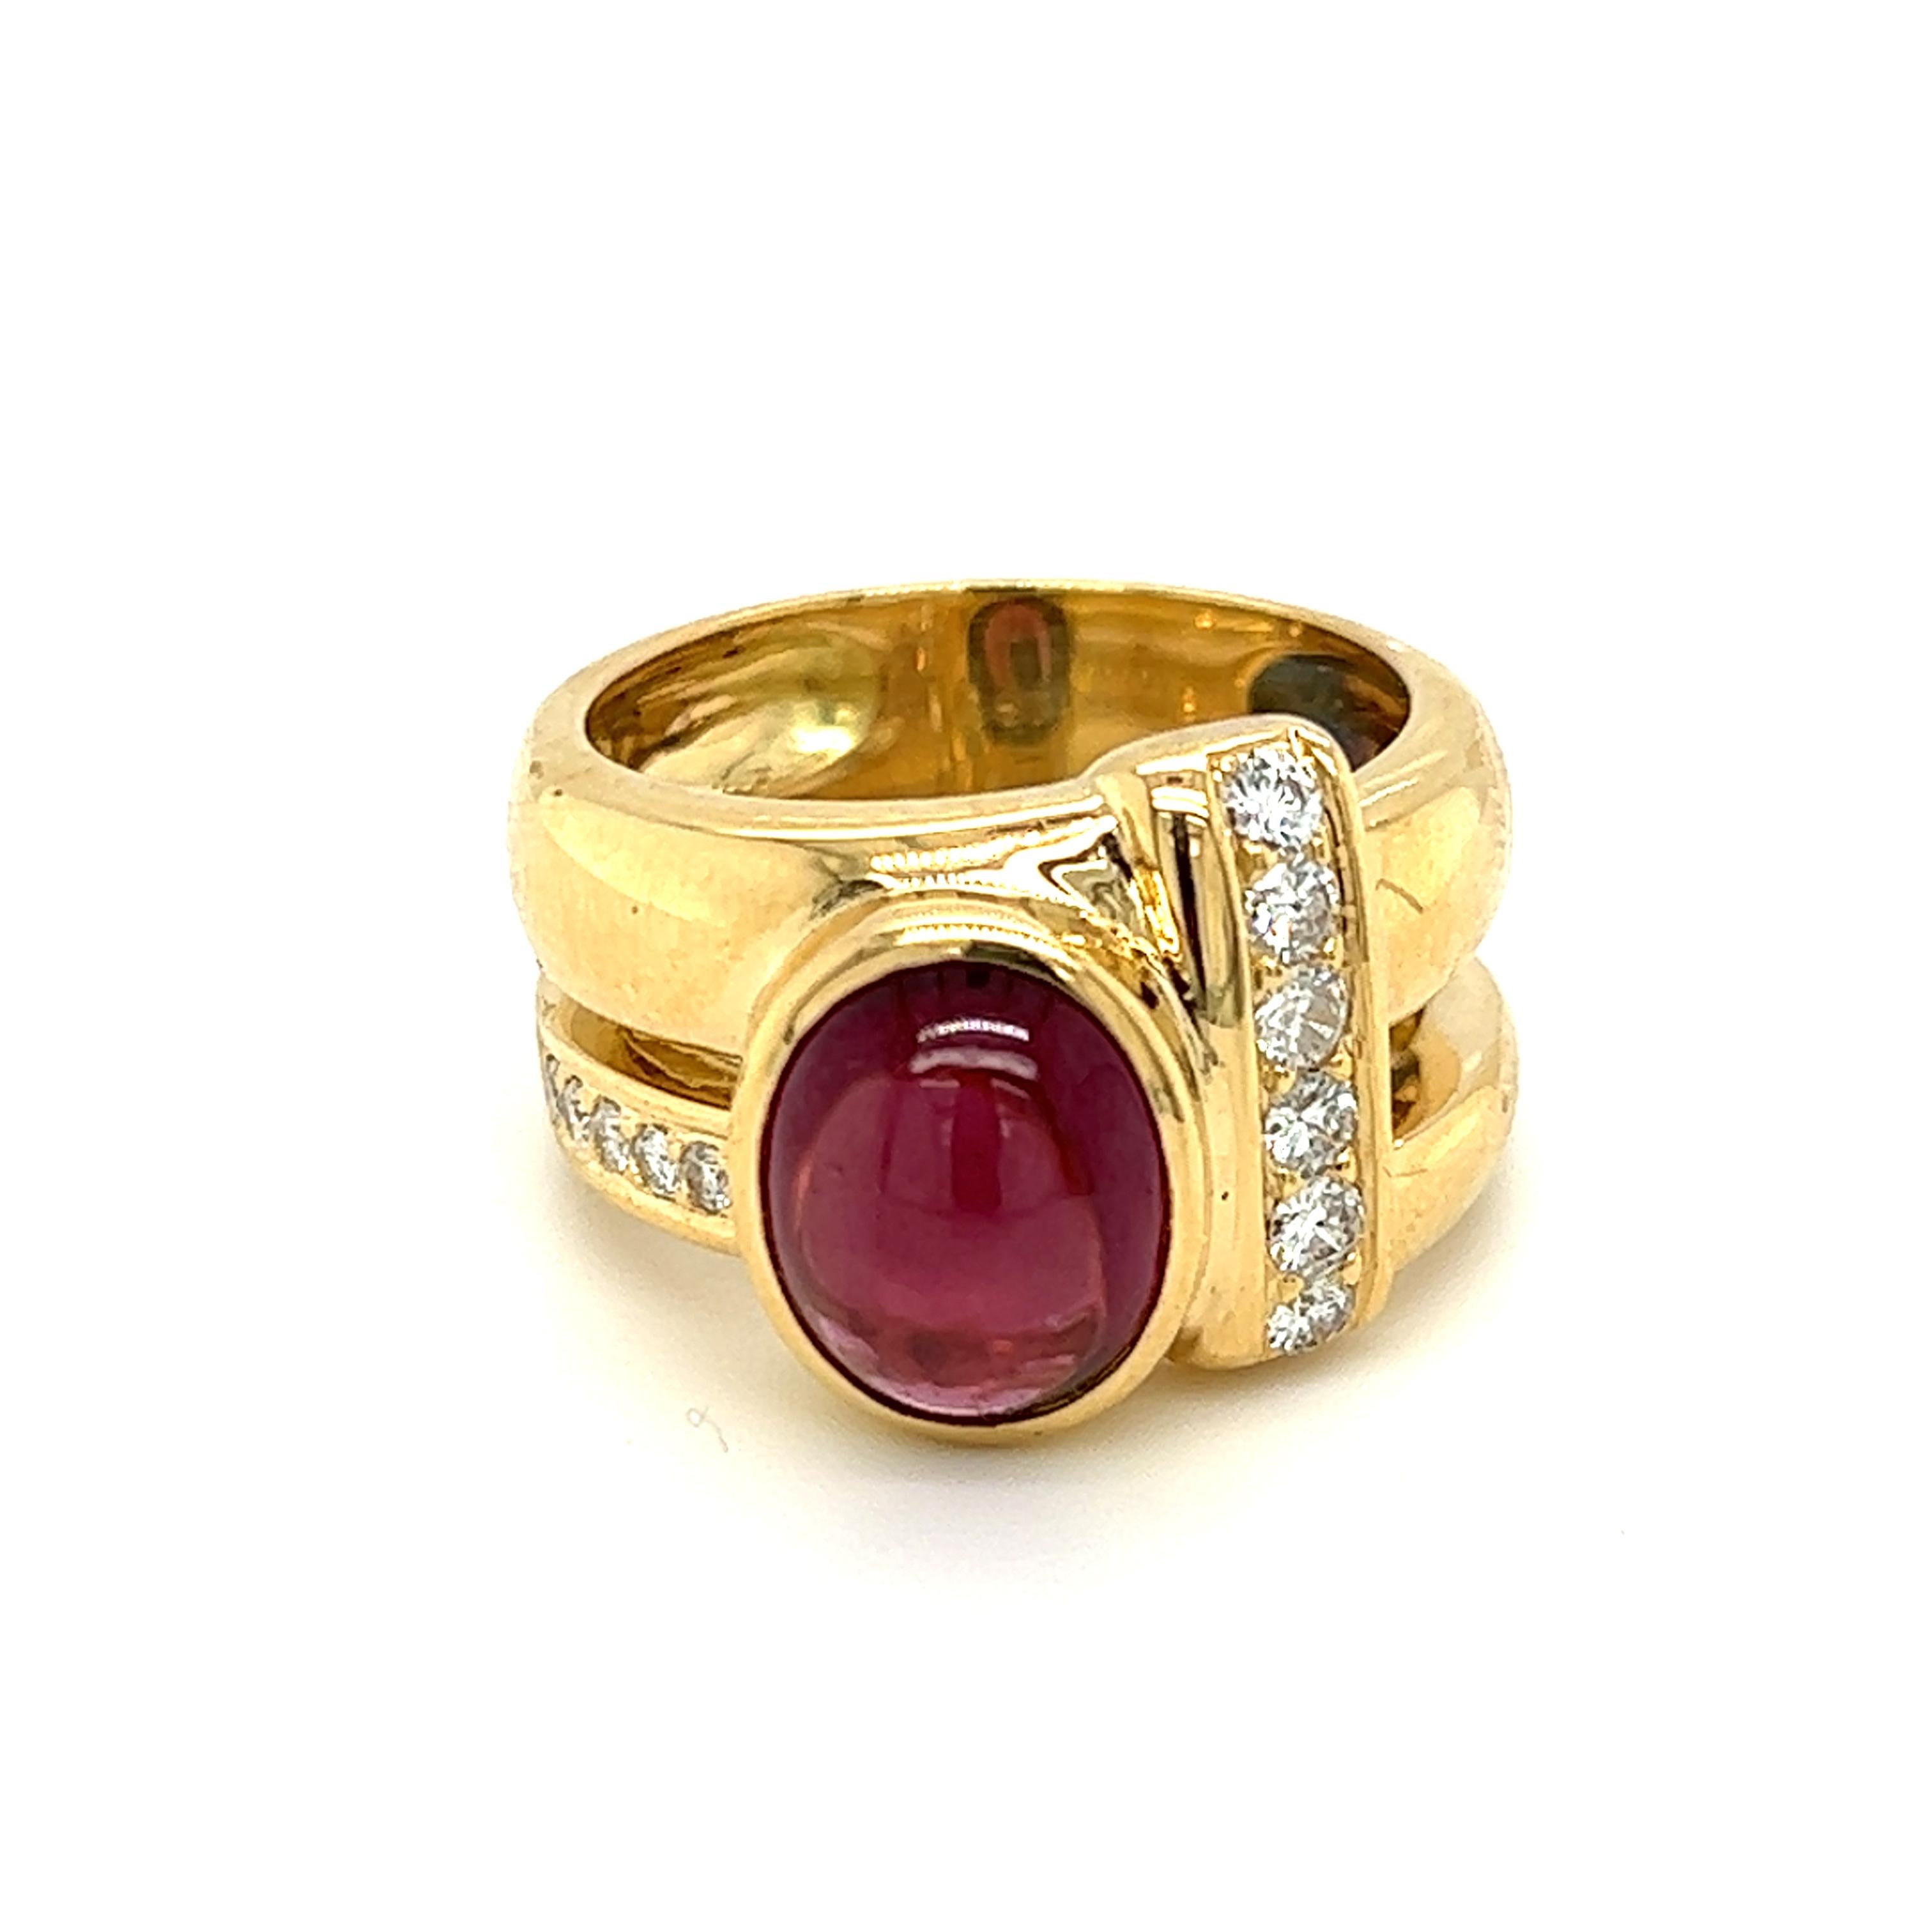 One 18 karat yellow gold split shank design fashion ring, set with one (1) 10.1x7.8mm natural oval cabochon pink rhodolite garnet, and eleven (11) round brilliant cut diamonds, approximately 0.38 carat total weight with matching G/H color and SI1/2